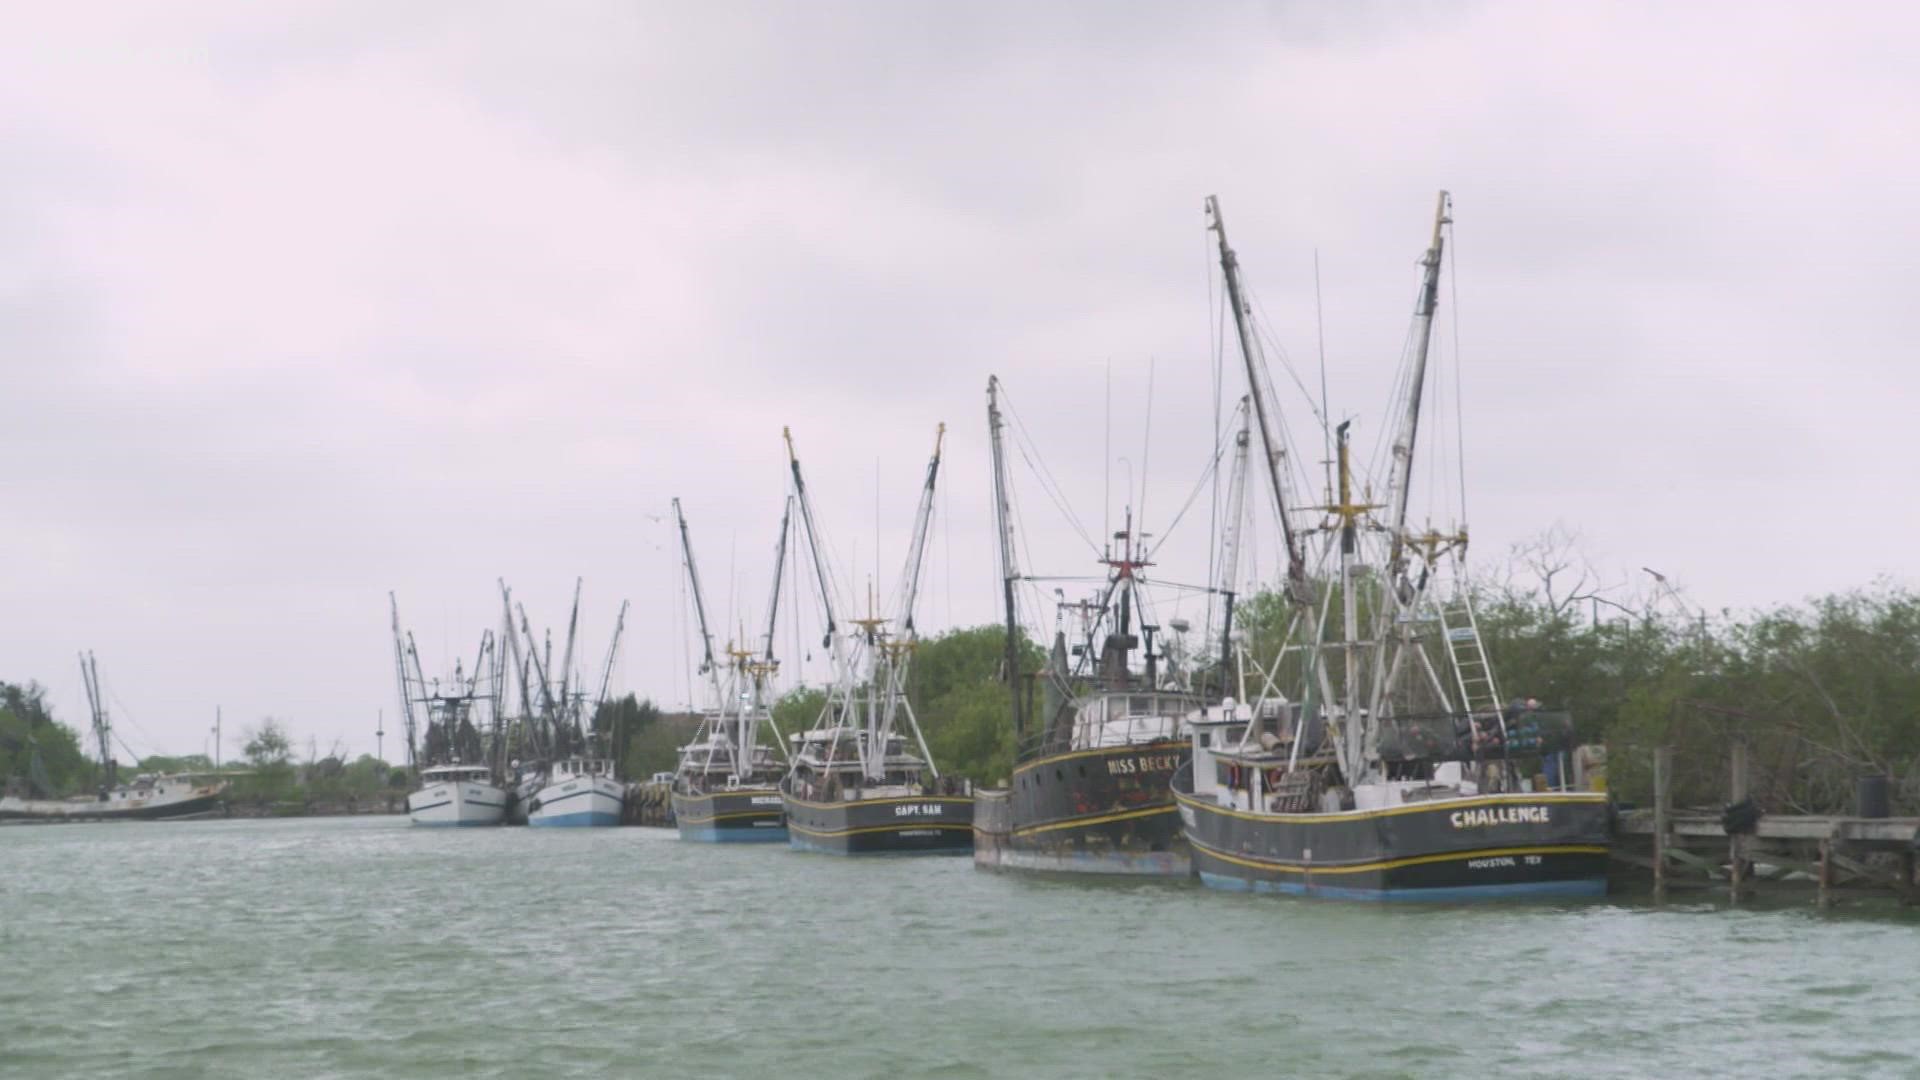 At least one longtime shrimper says the issues aren’t limited to Texas.